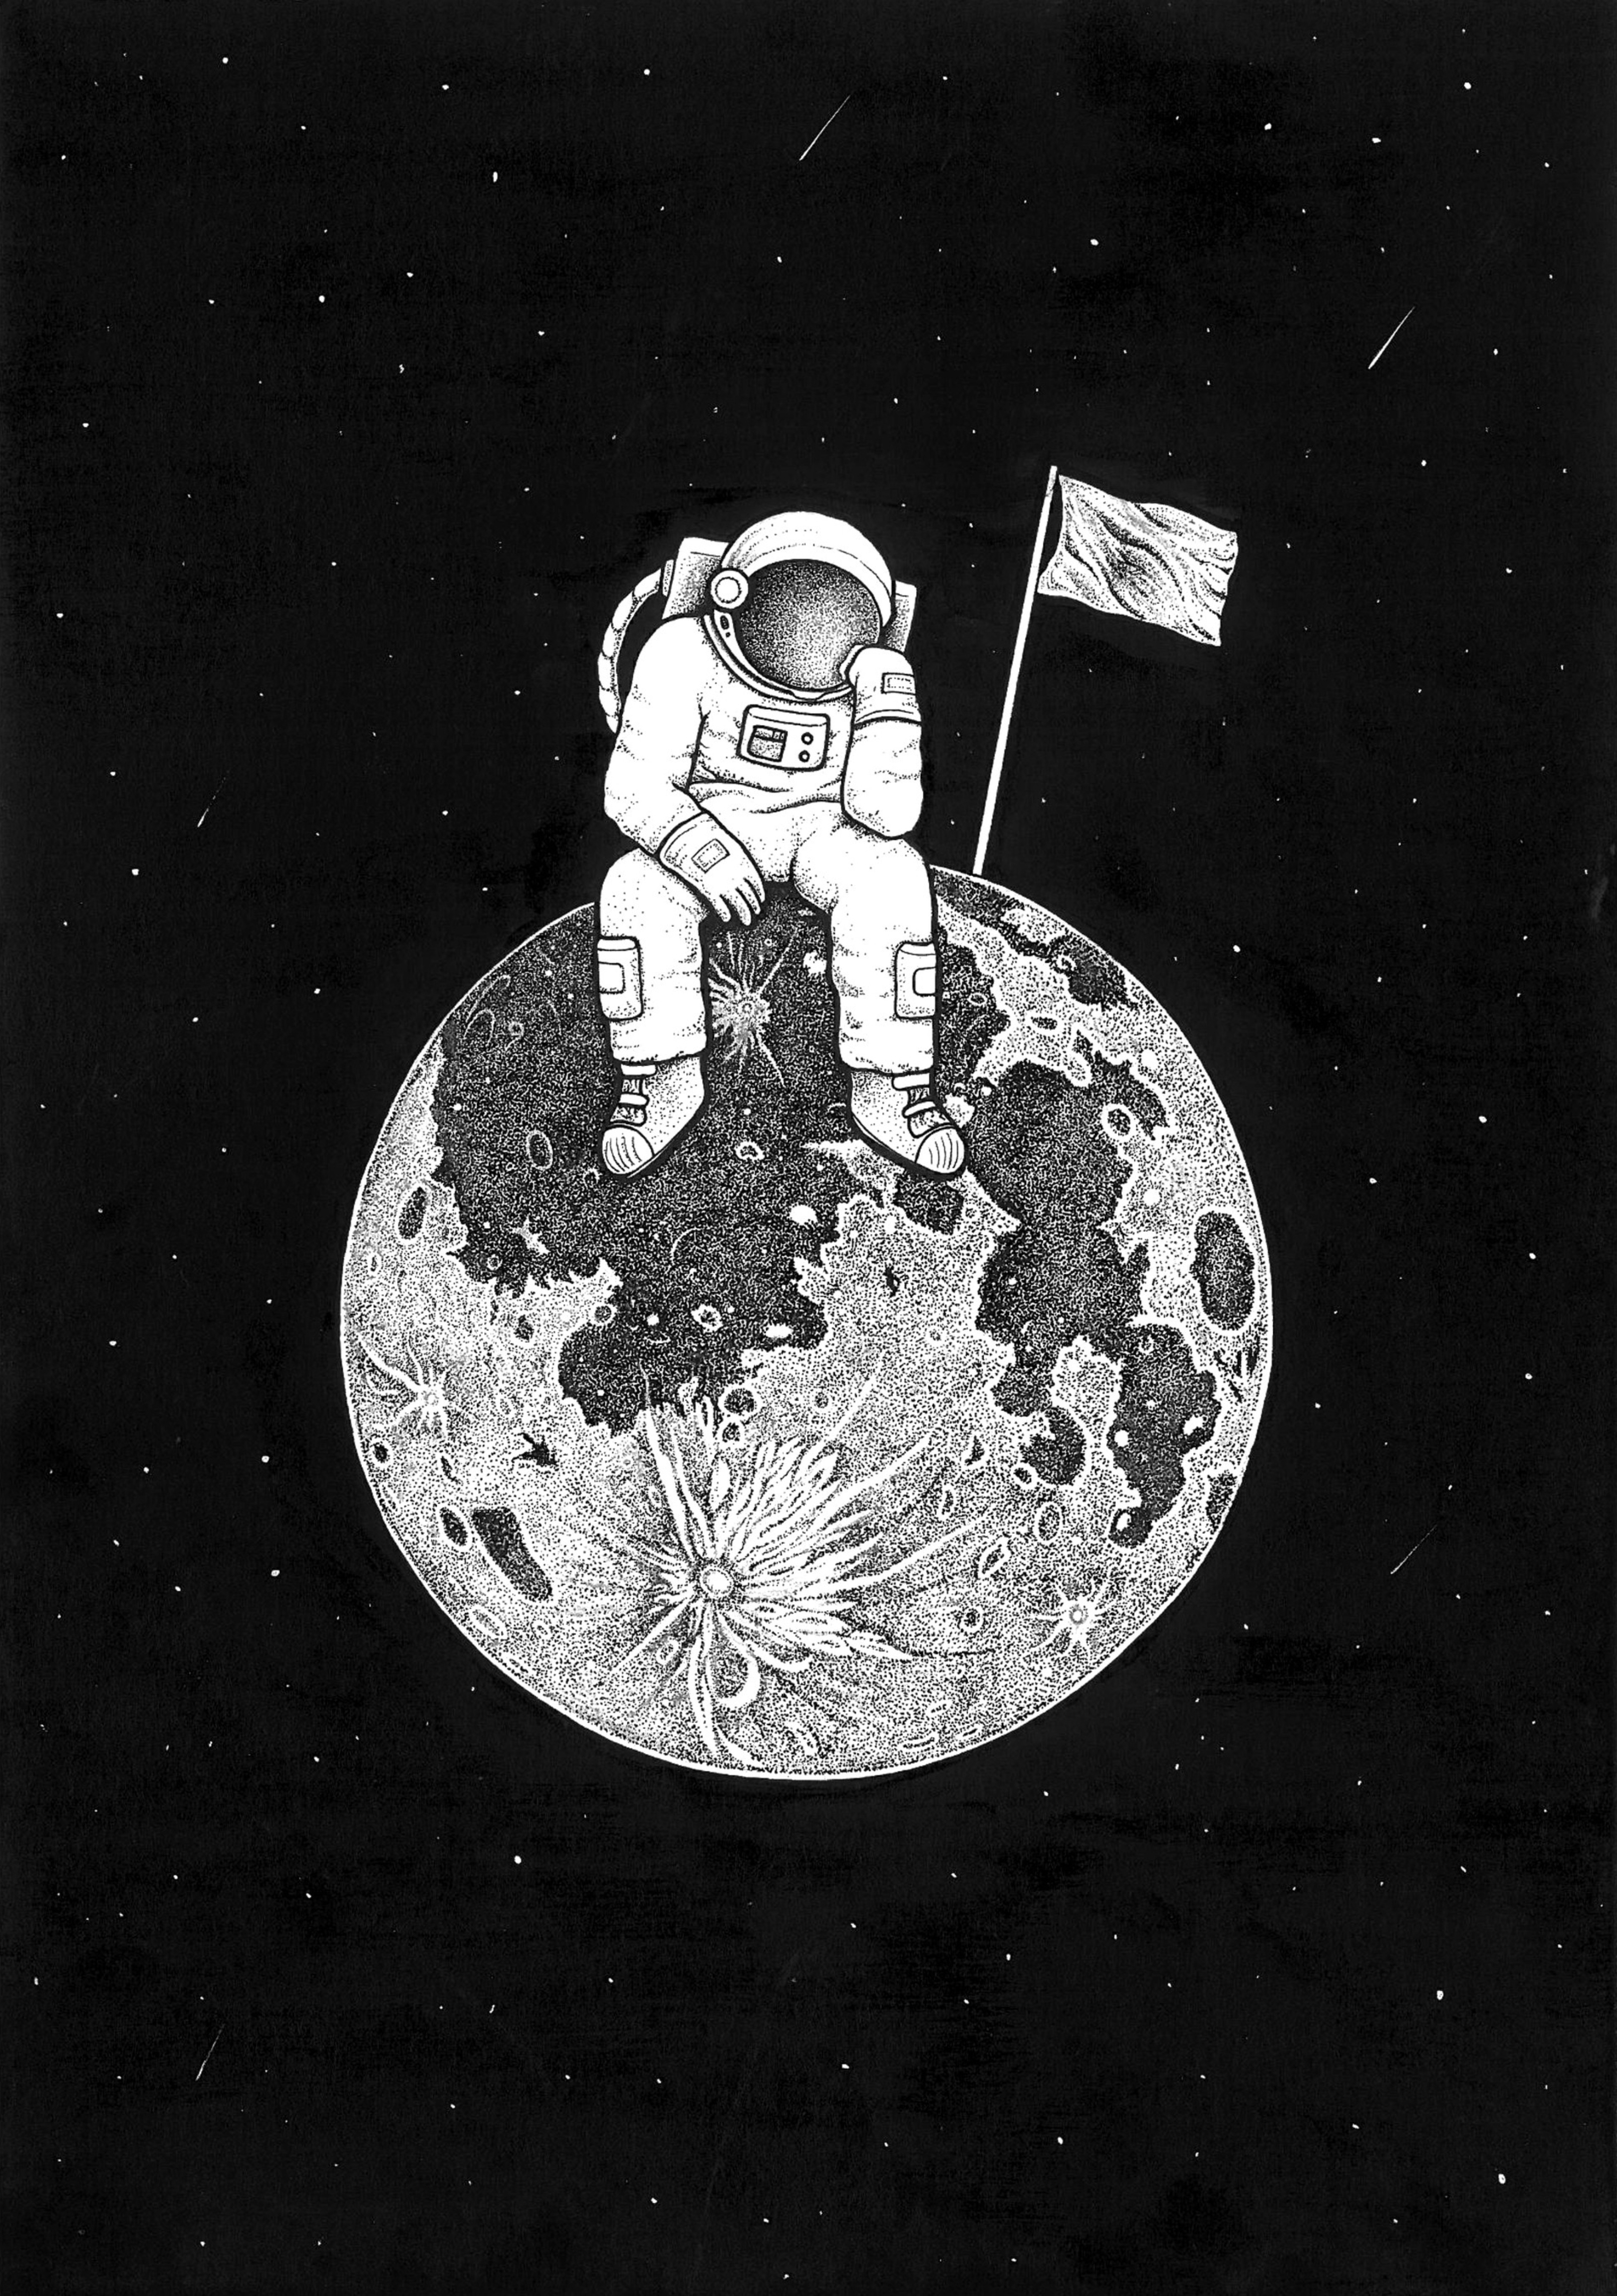 Free HD astronaut, art, universe, chb, bw, picture, planet, drawing